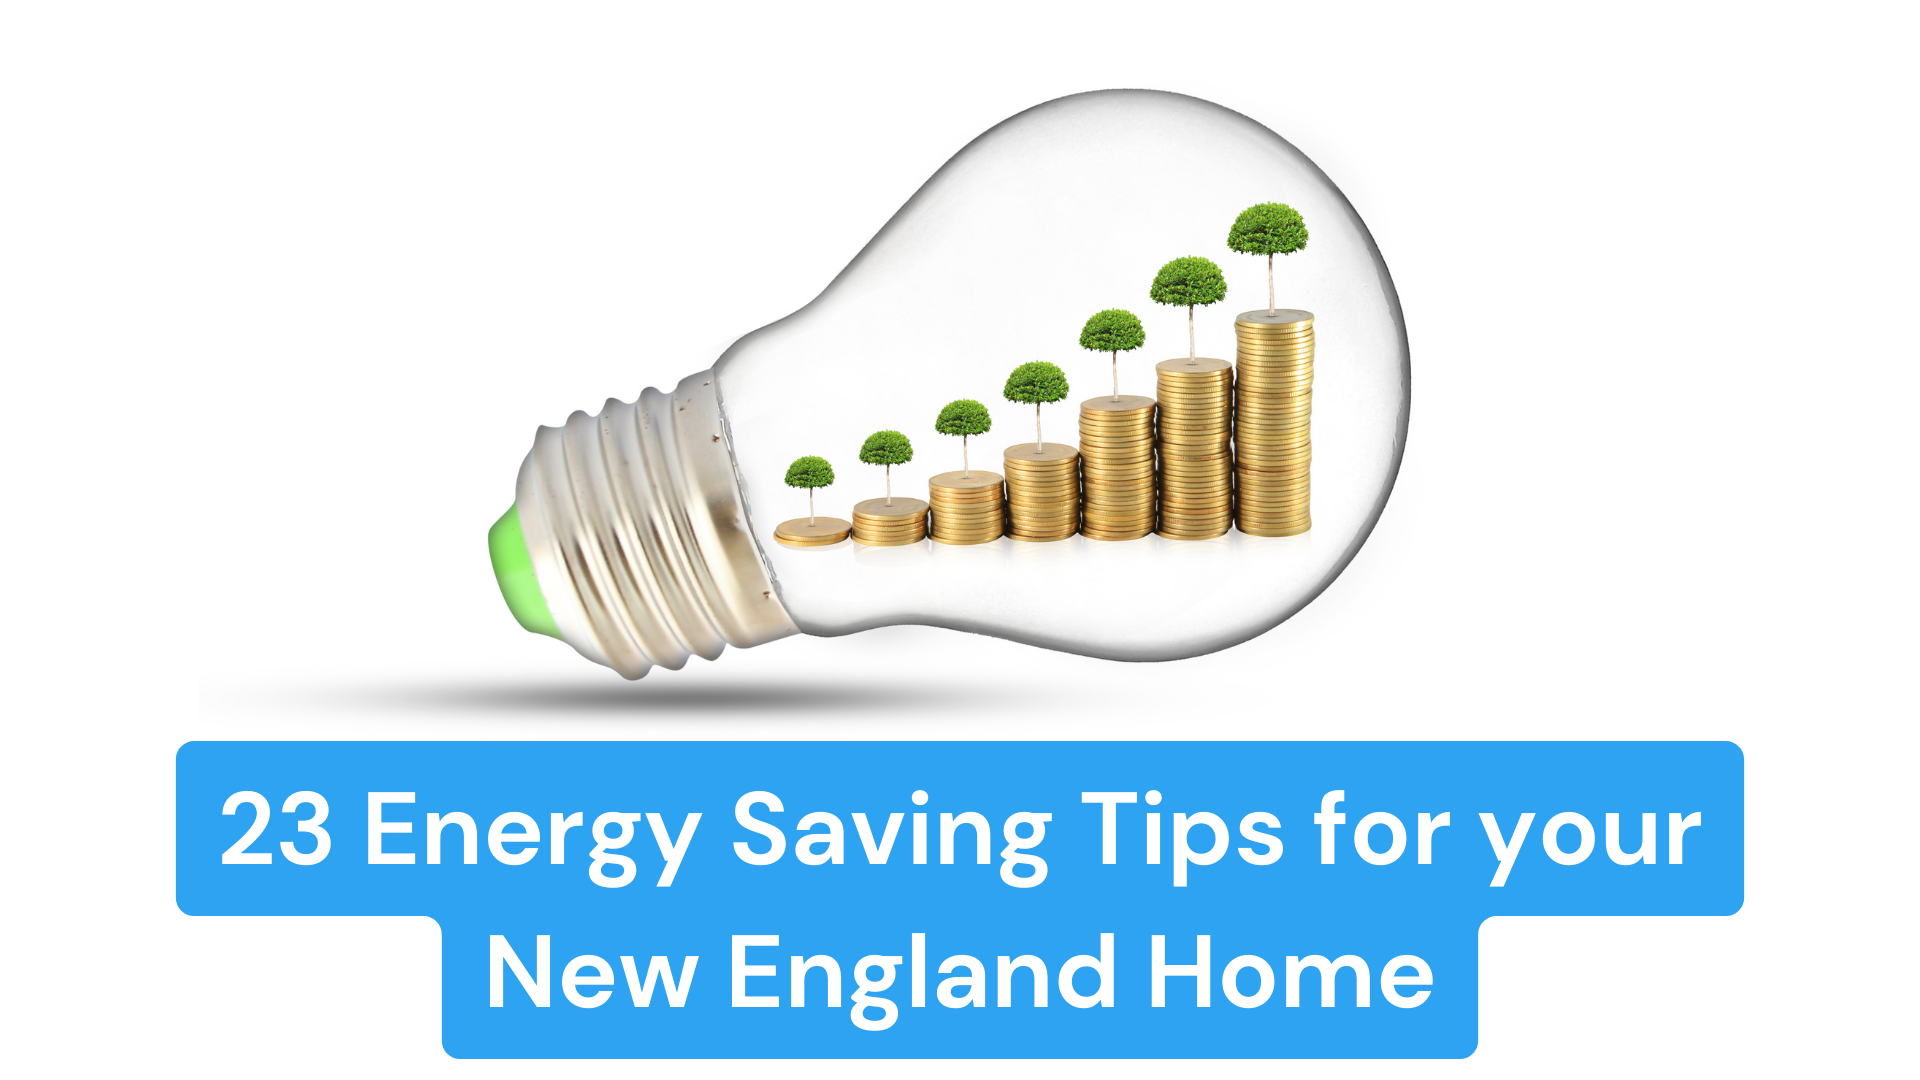 23 Energy Saving Tips for your New England Home>

  <h1>23 Energy Saving Tips for your New England Home
</h1>

  <div class=